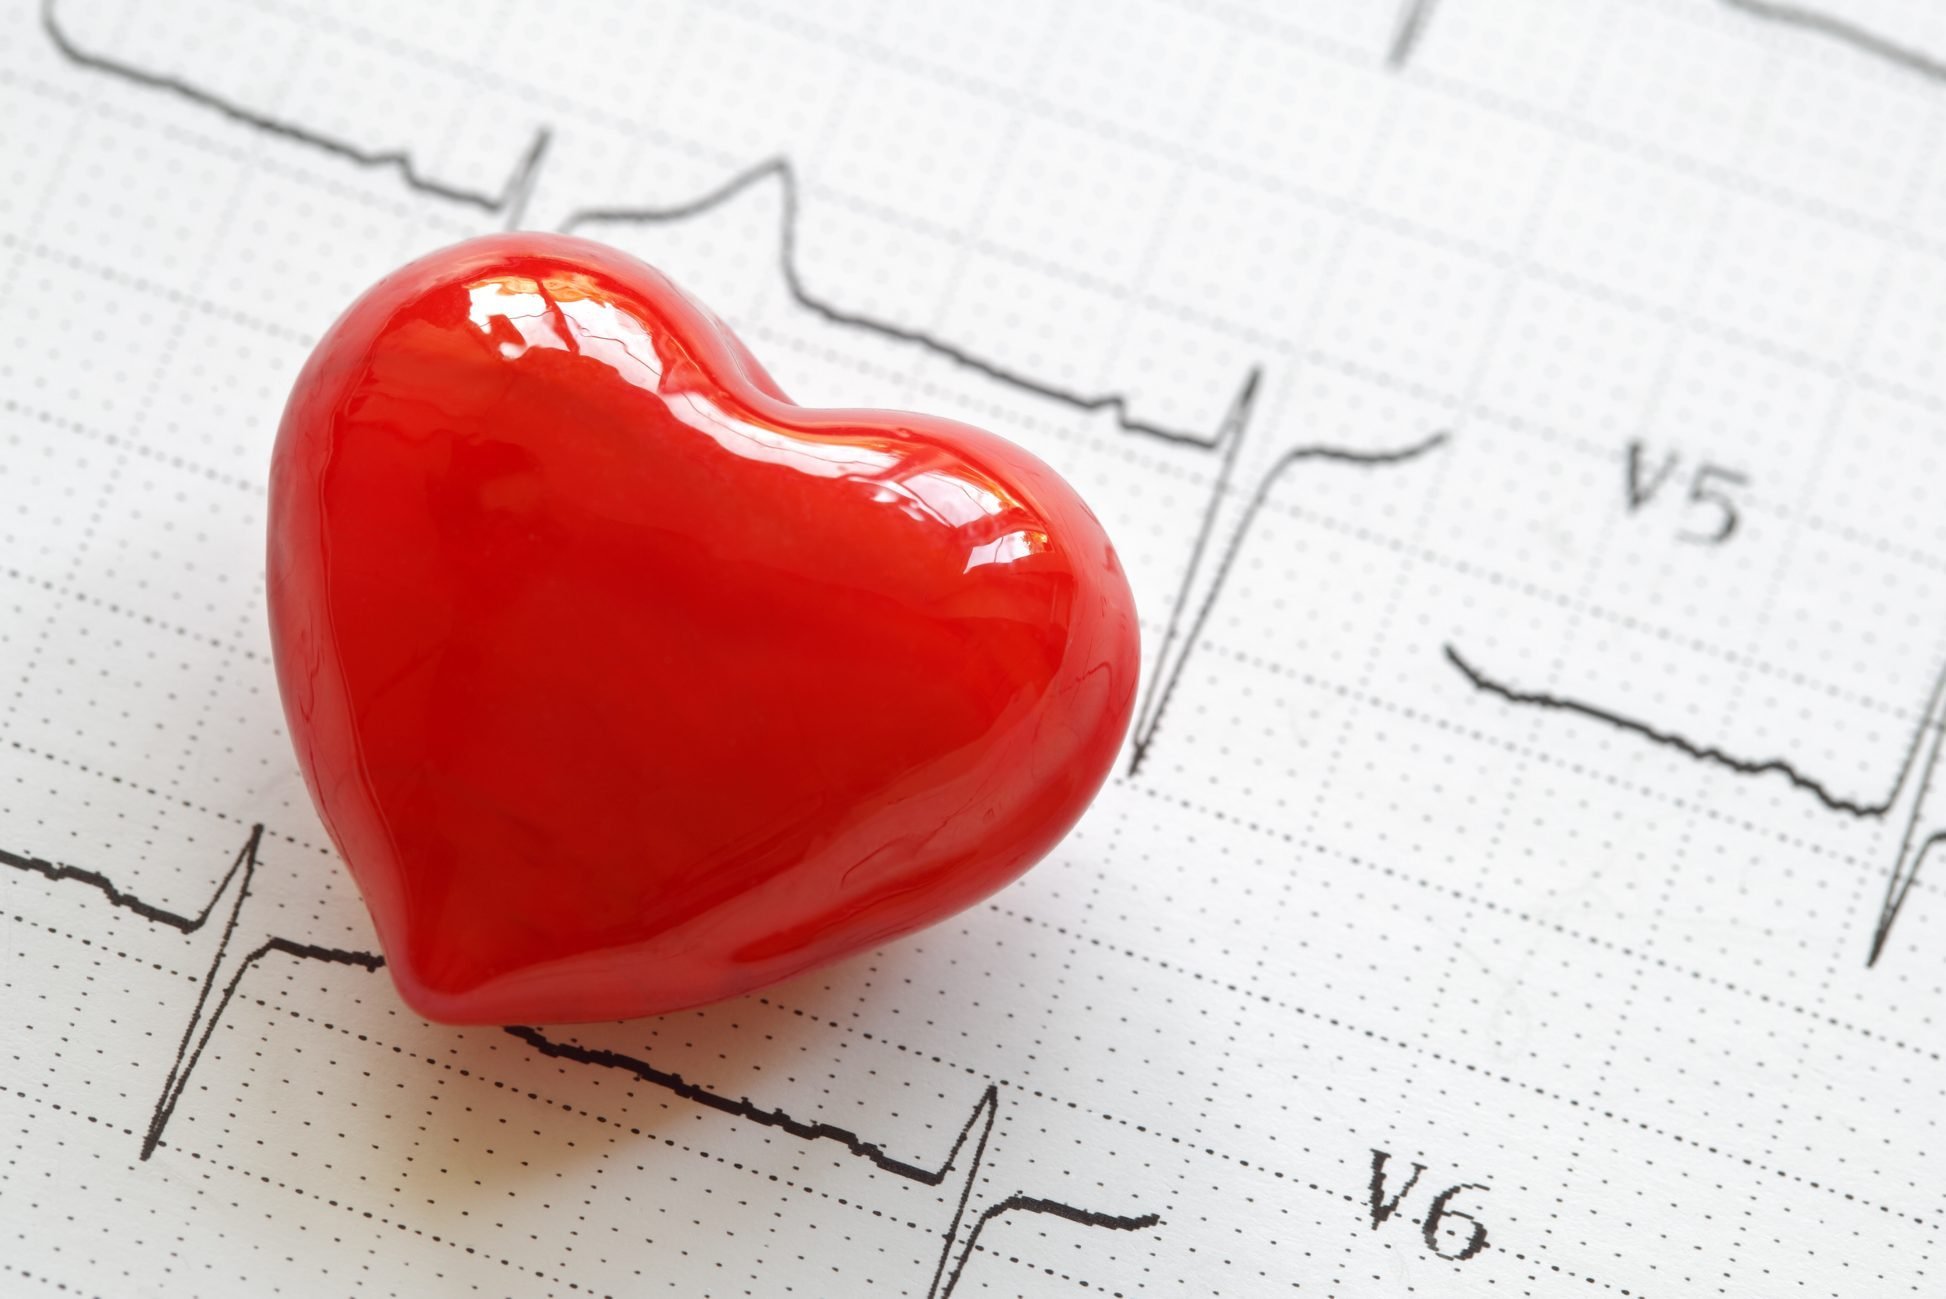 Cardiologists Just Cleared Up 7 Common—but Inaccurate—Beliefs about Heart Disease